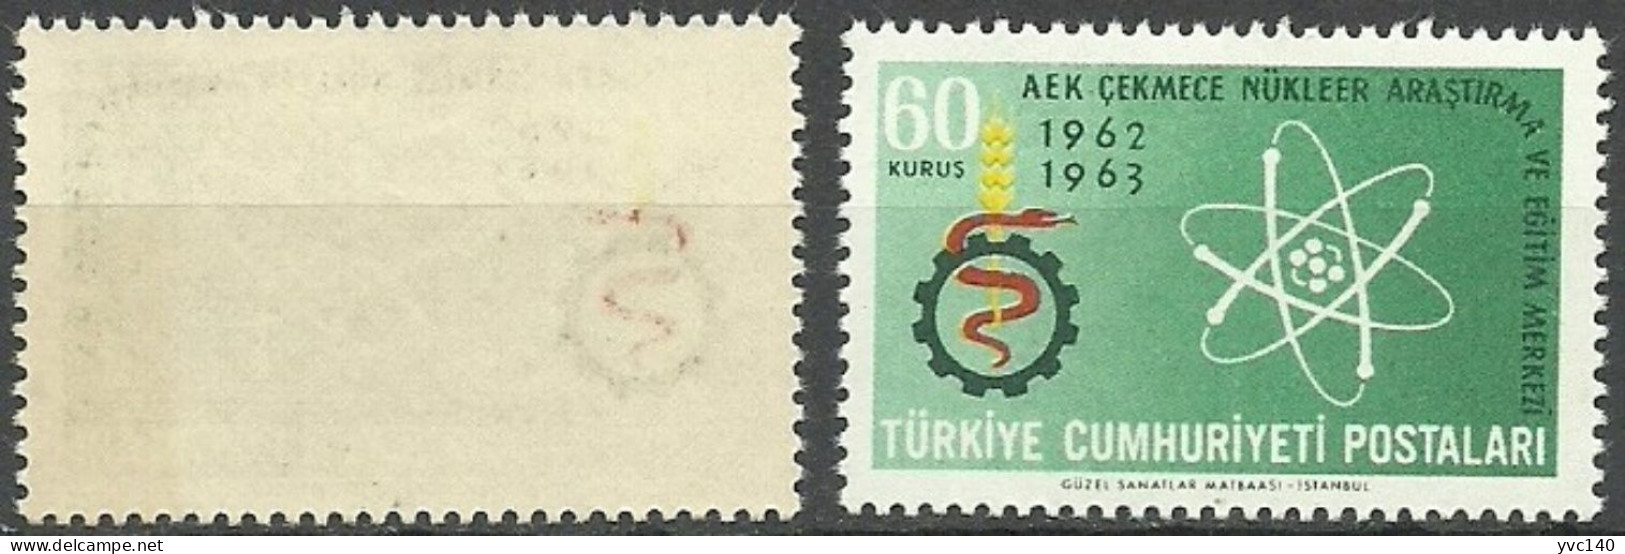 Turkey; 1963 1st Anniv. Of Opening Of Turkish Nuclear Research Centre 60 K. "Abklatsch Print" - Unused Stamps